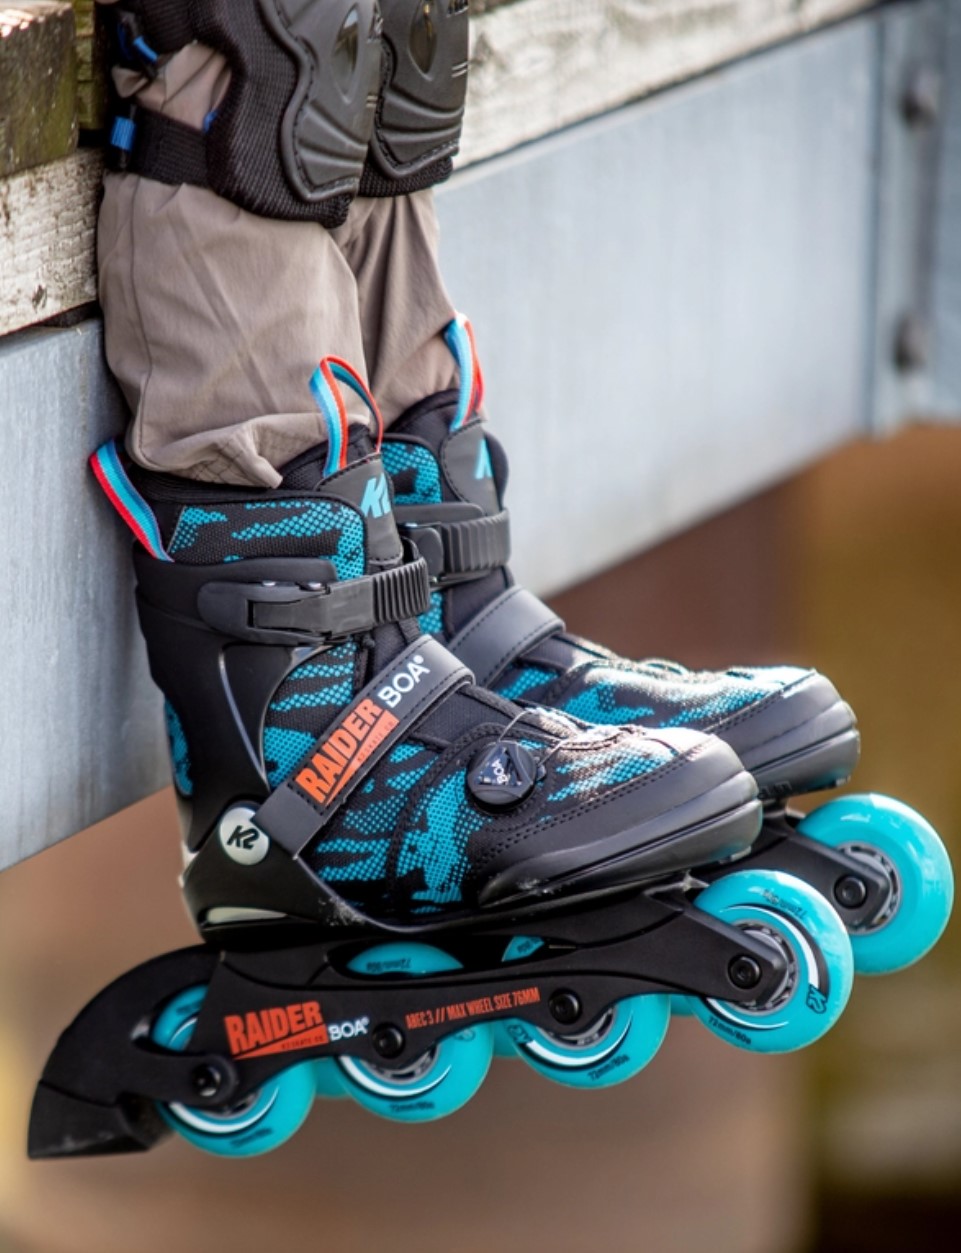 K2 Youth Skate Raider Boa with four wheels and Boa closure system on feet